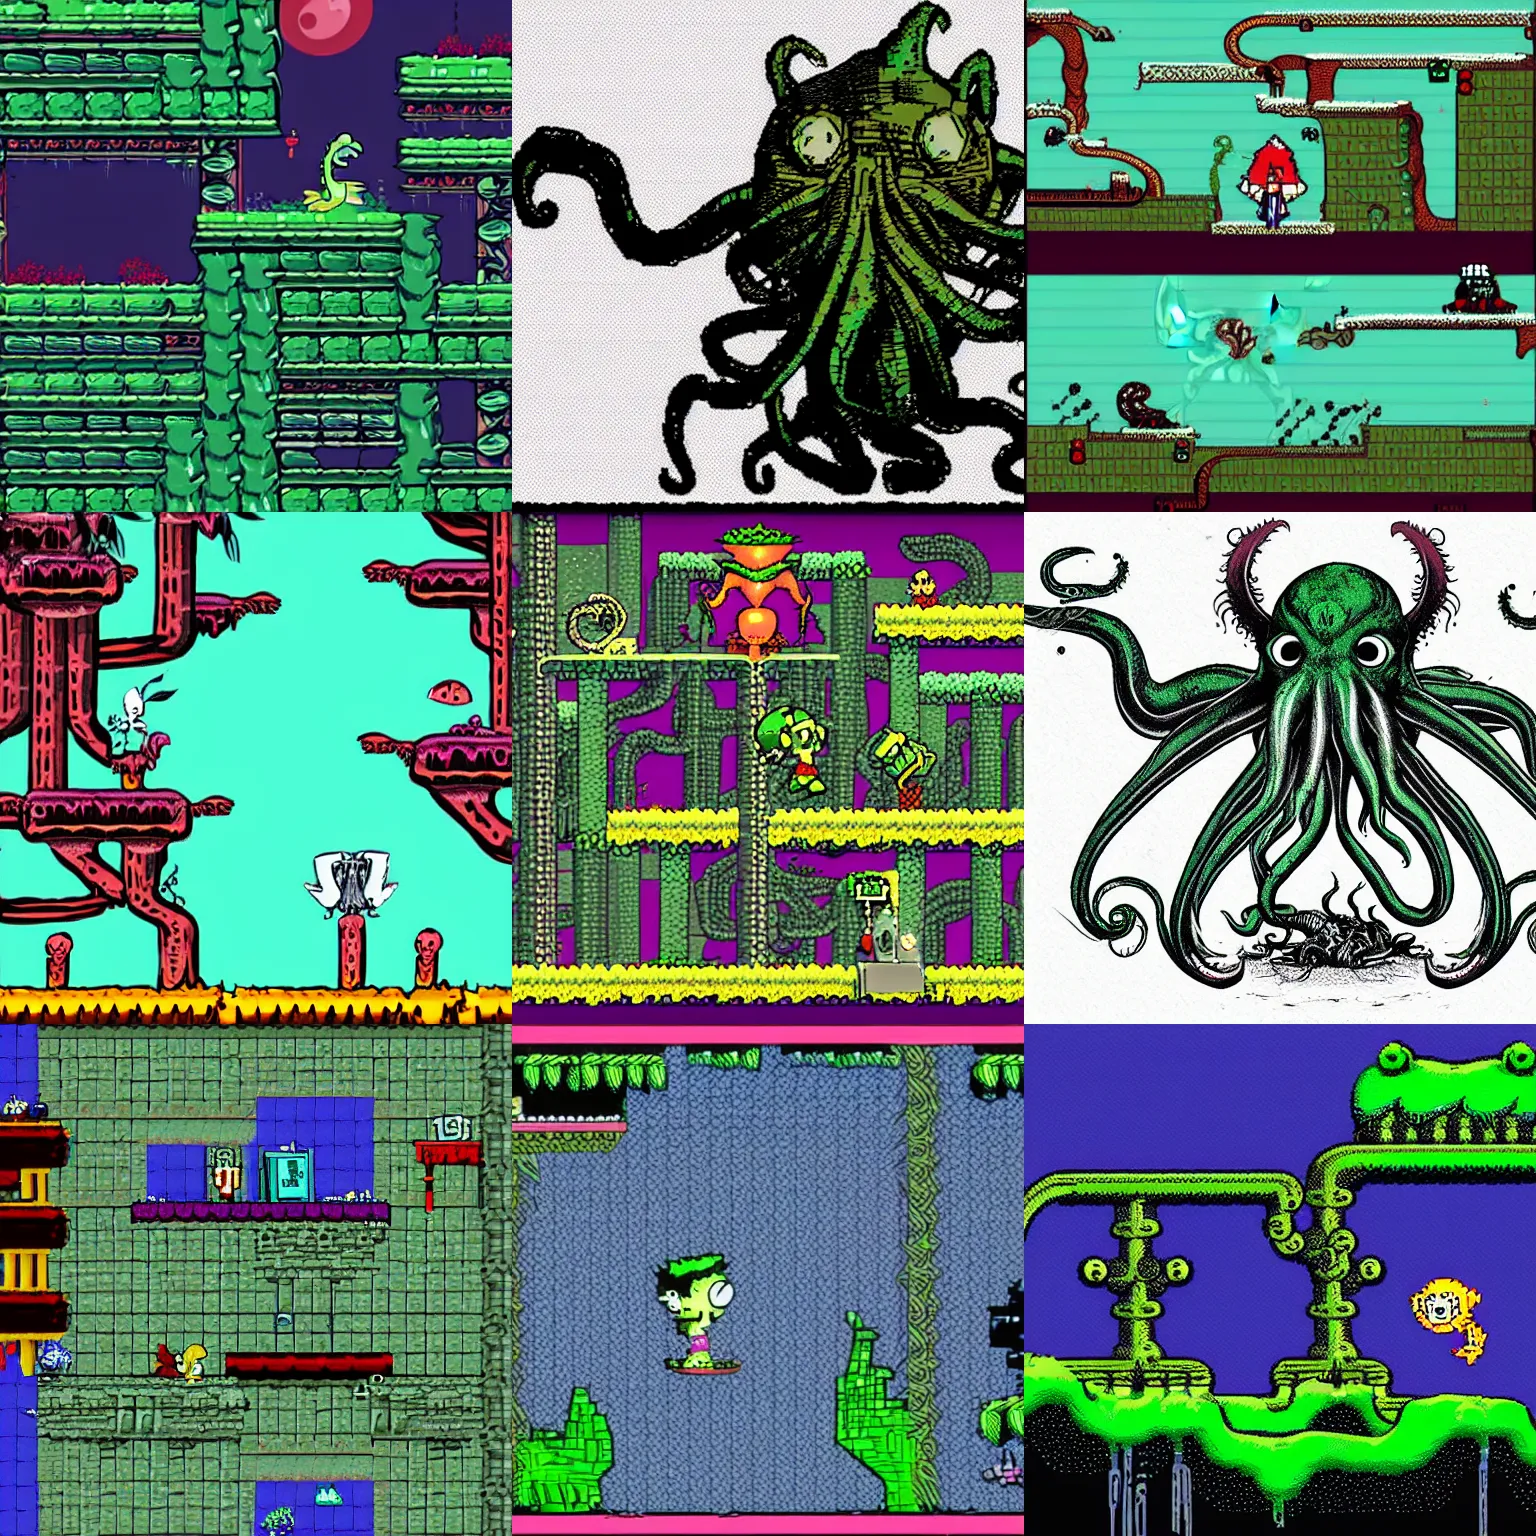 Prompt: a 2d side scrolling platformer about Cthulhu in the style of Dr Seuss illustrations